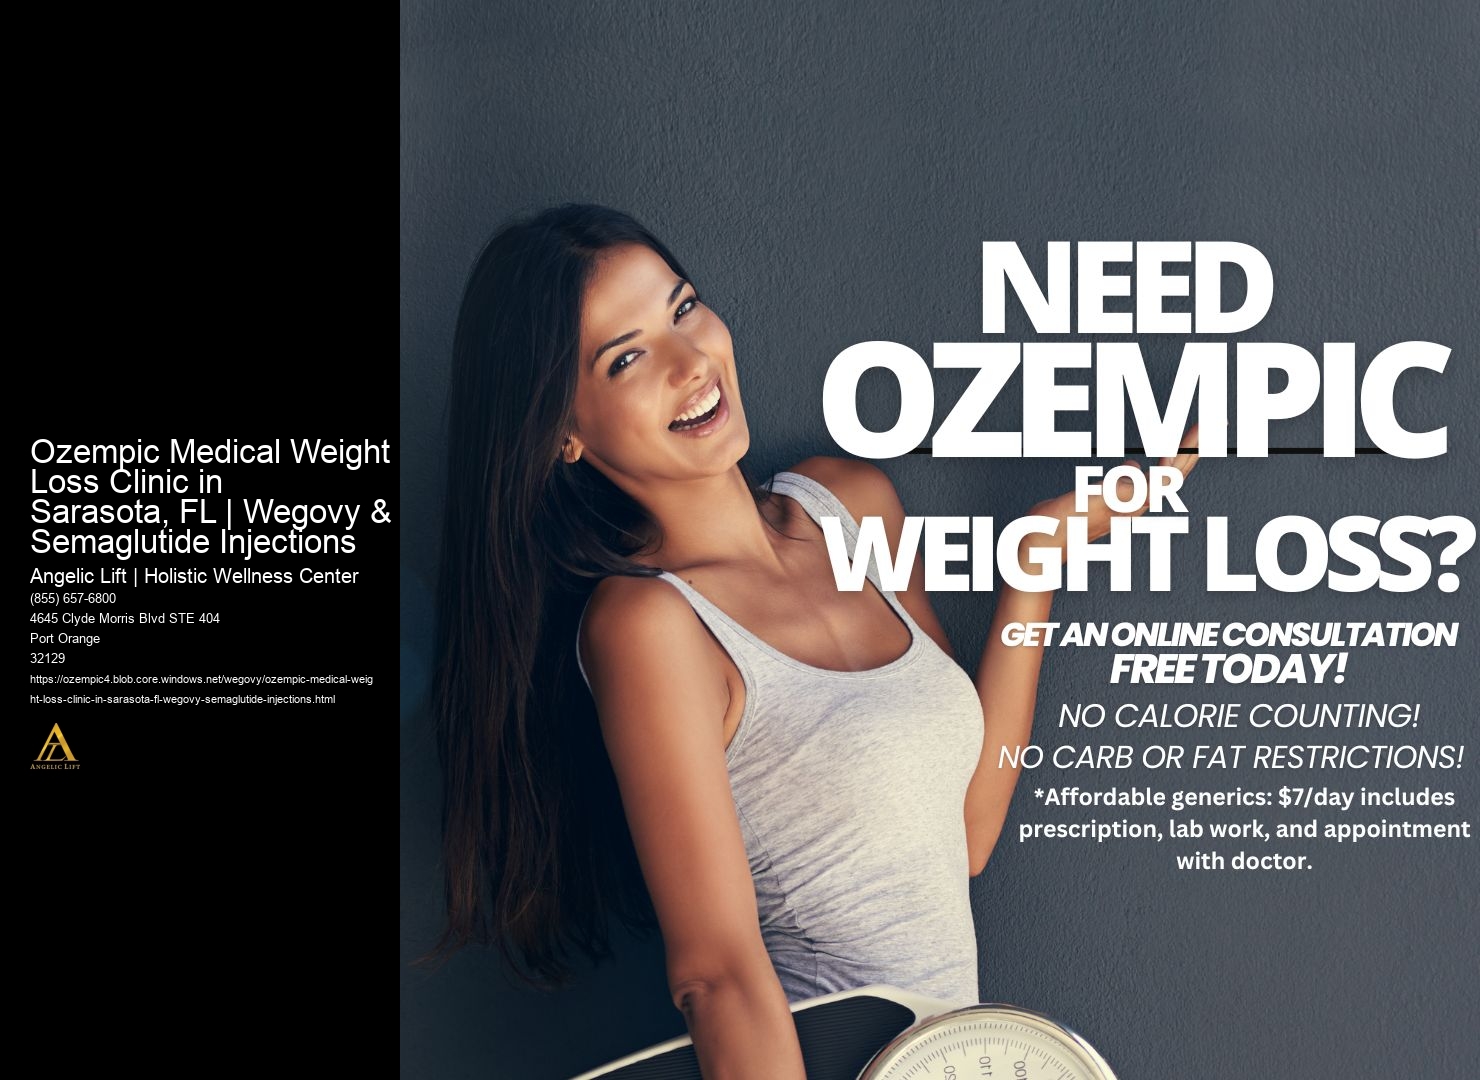 Ozempic Medical Weight Loss Clinic in Sarasota, FL | Wegovy & Semaglutide Injections